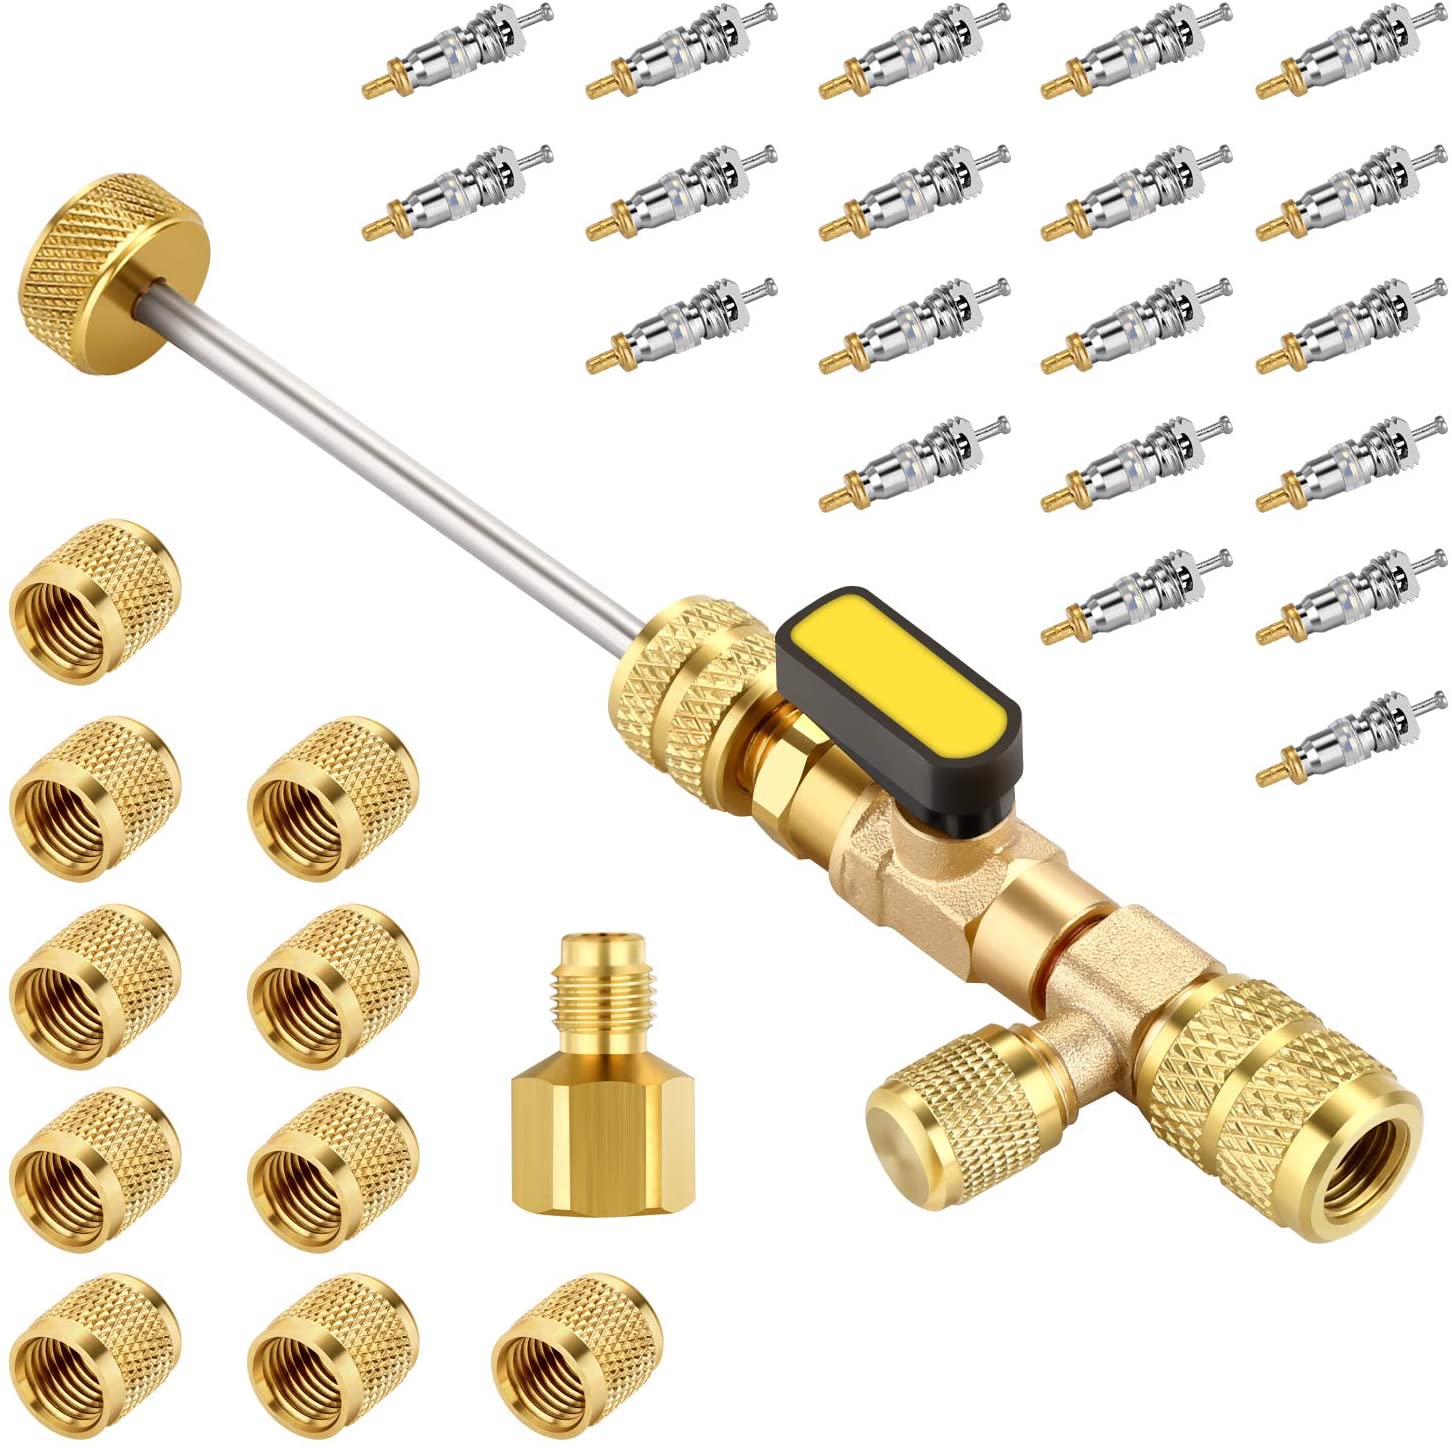 Valve Core Remover Installer Tool Valve Core Loading And Unloading Tool Core Tool 1430 Refrigerant Changer